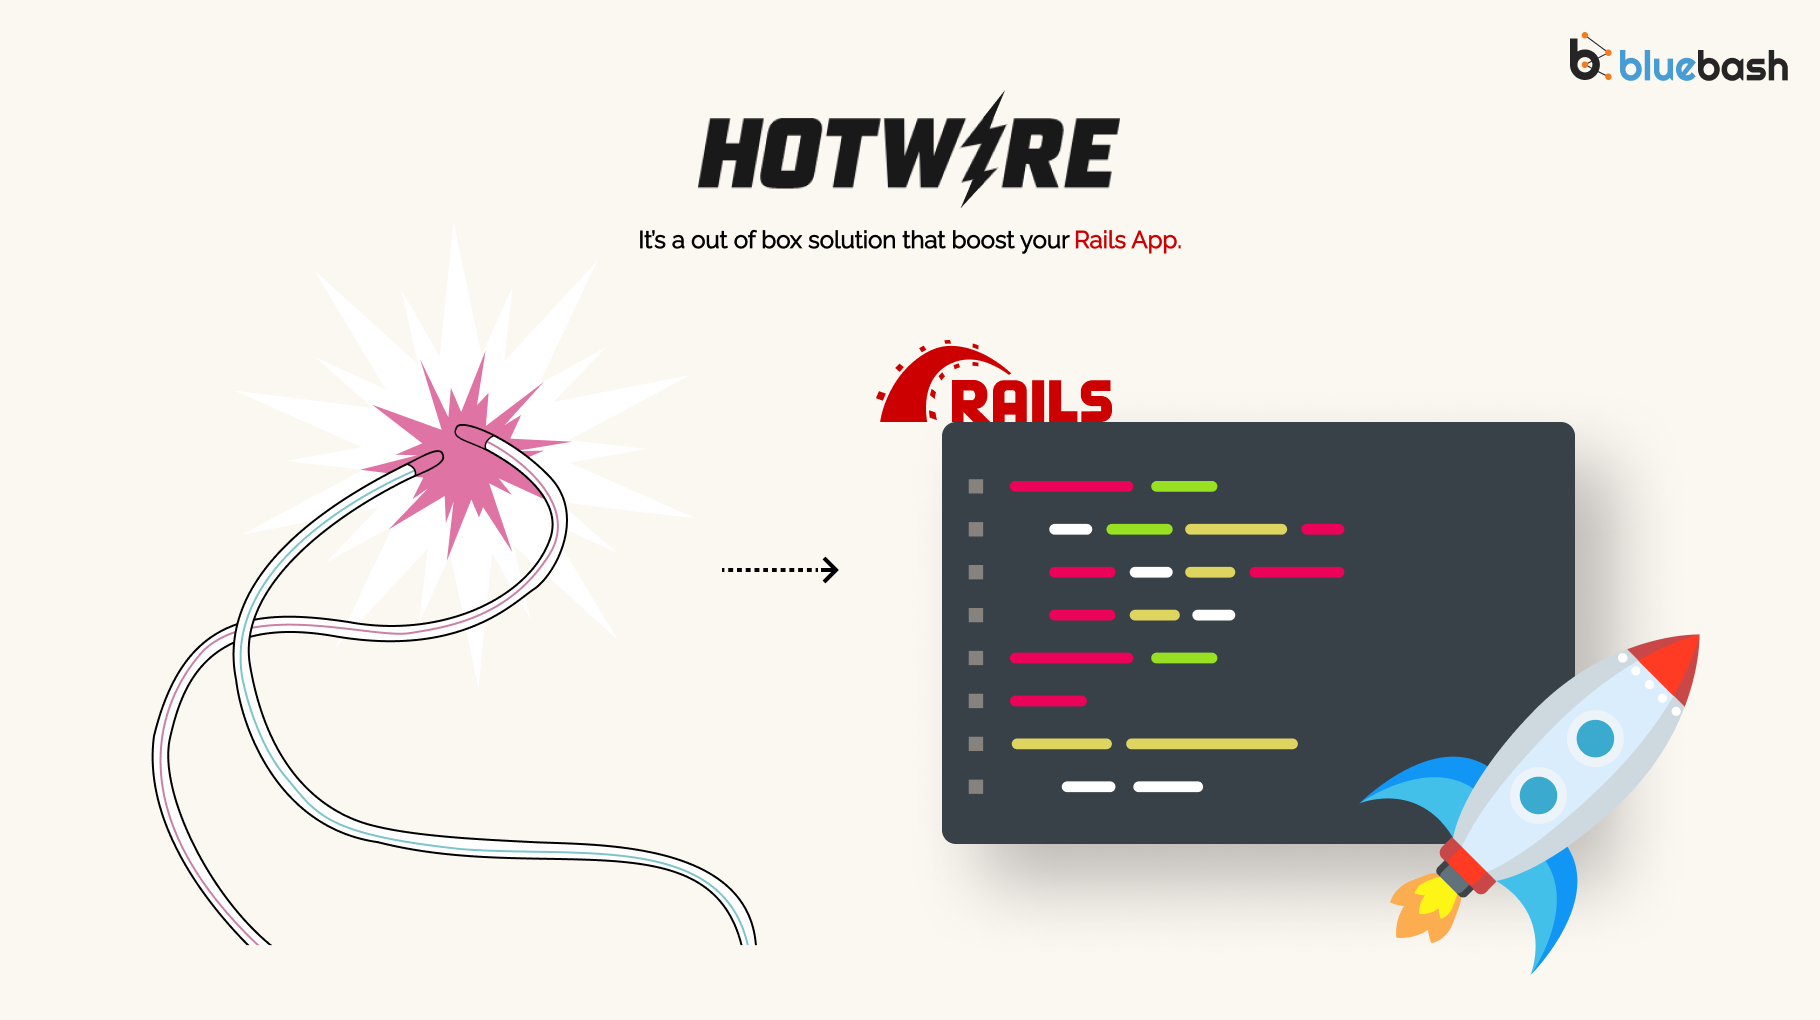 Hotwire #1 boost your Rails App